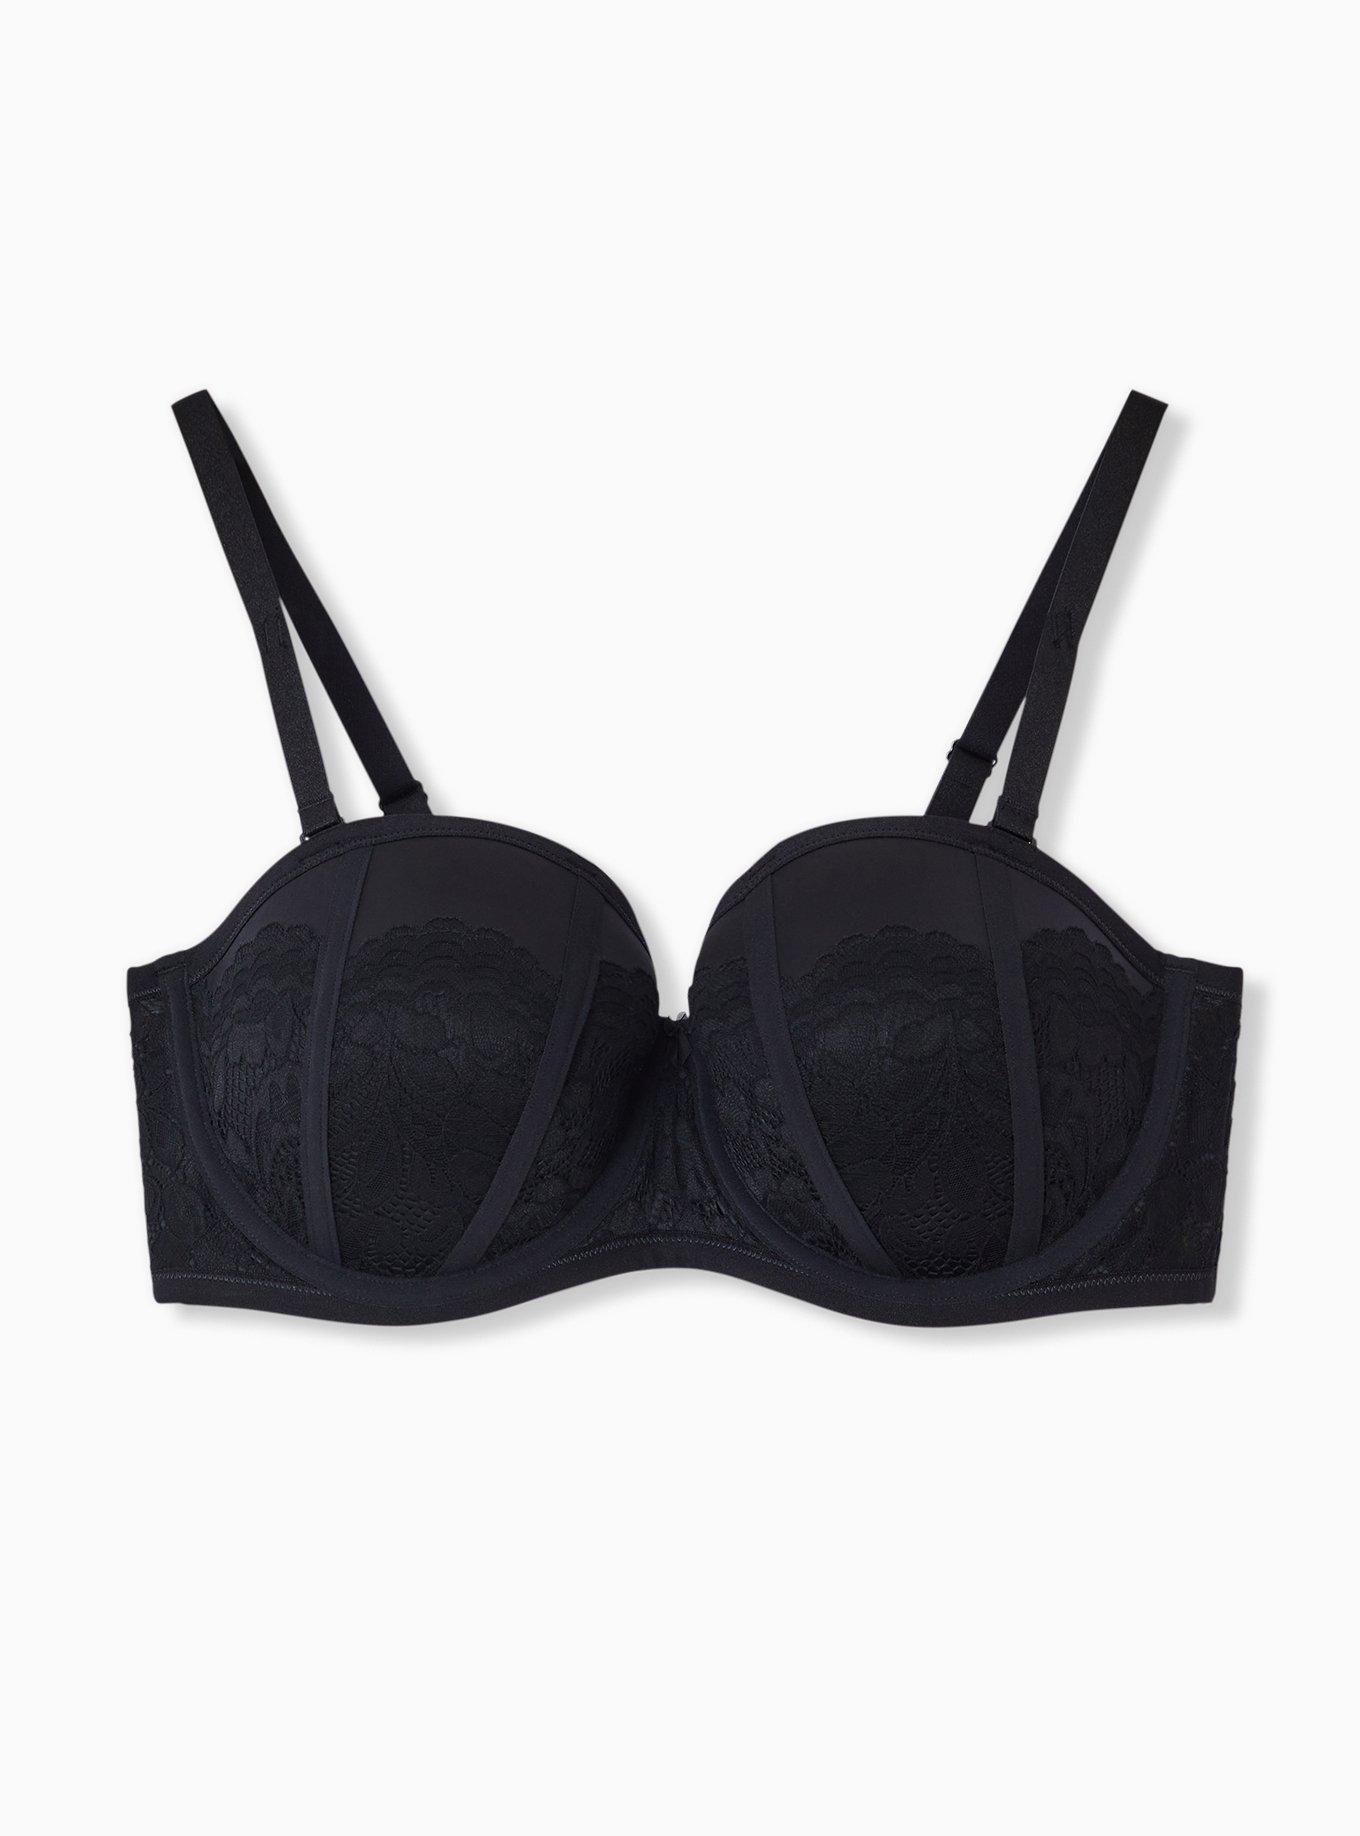 Victoria's Secret Bombshell Strapless Push Up Bra, Add 2 Cups, - Import It  All